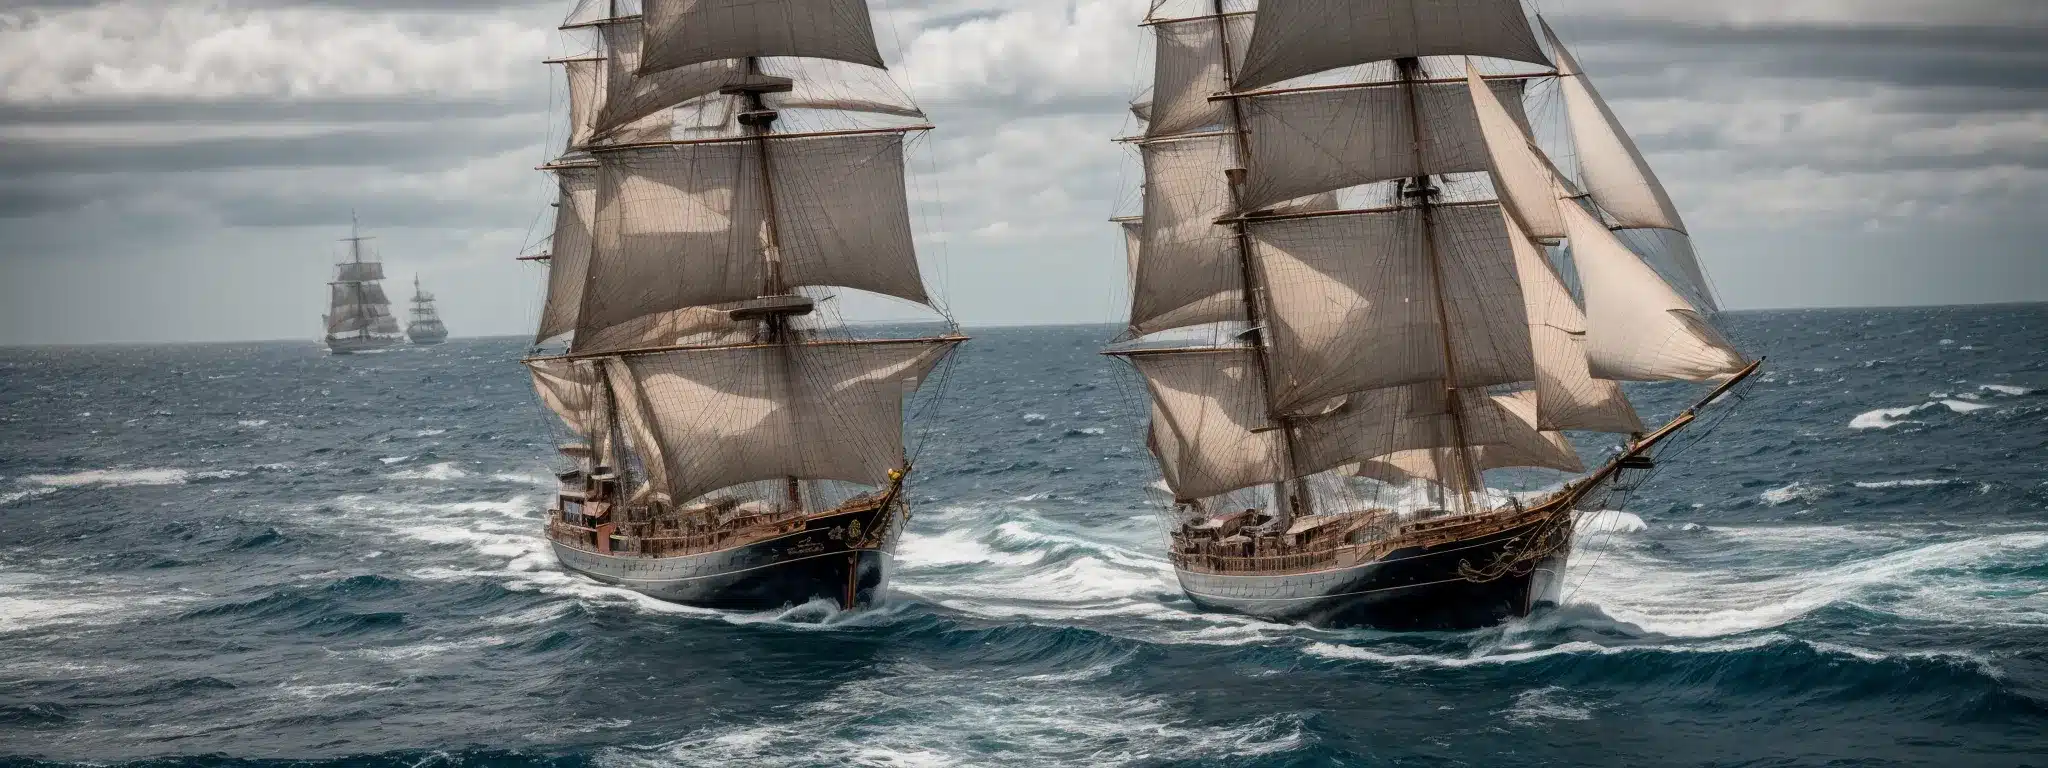 A Majestic Sailing Ship Cuts Through The Ocean, Its Unique, Vivid Sails Standing Out Against A Backdrop Of Competing Vessels.